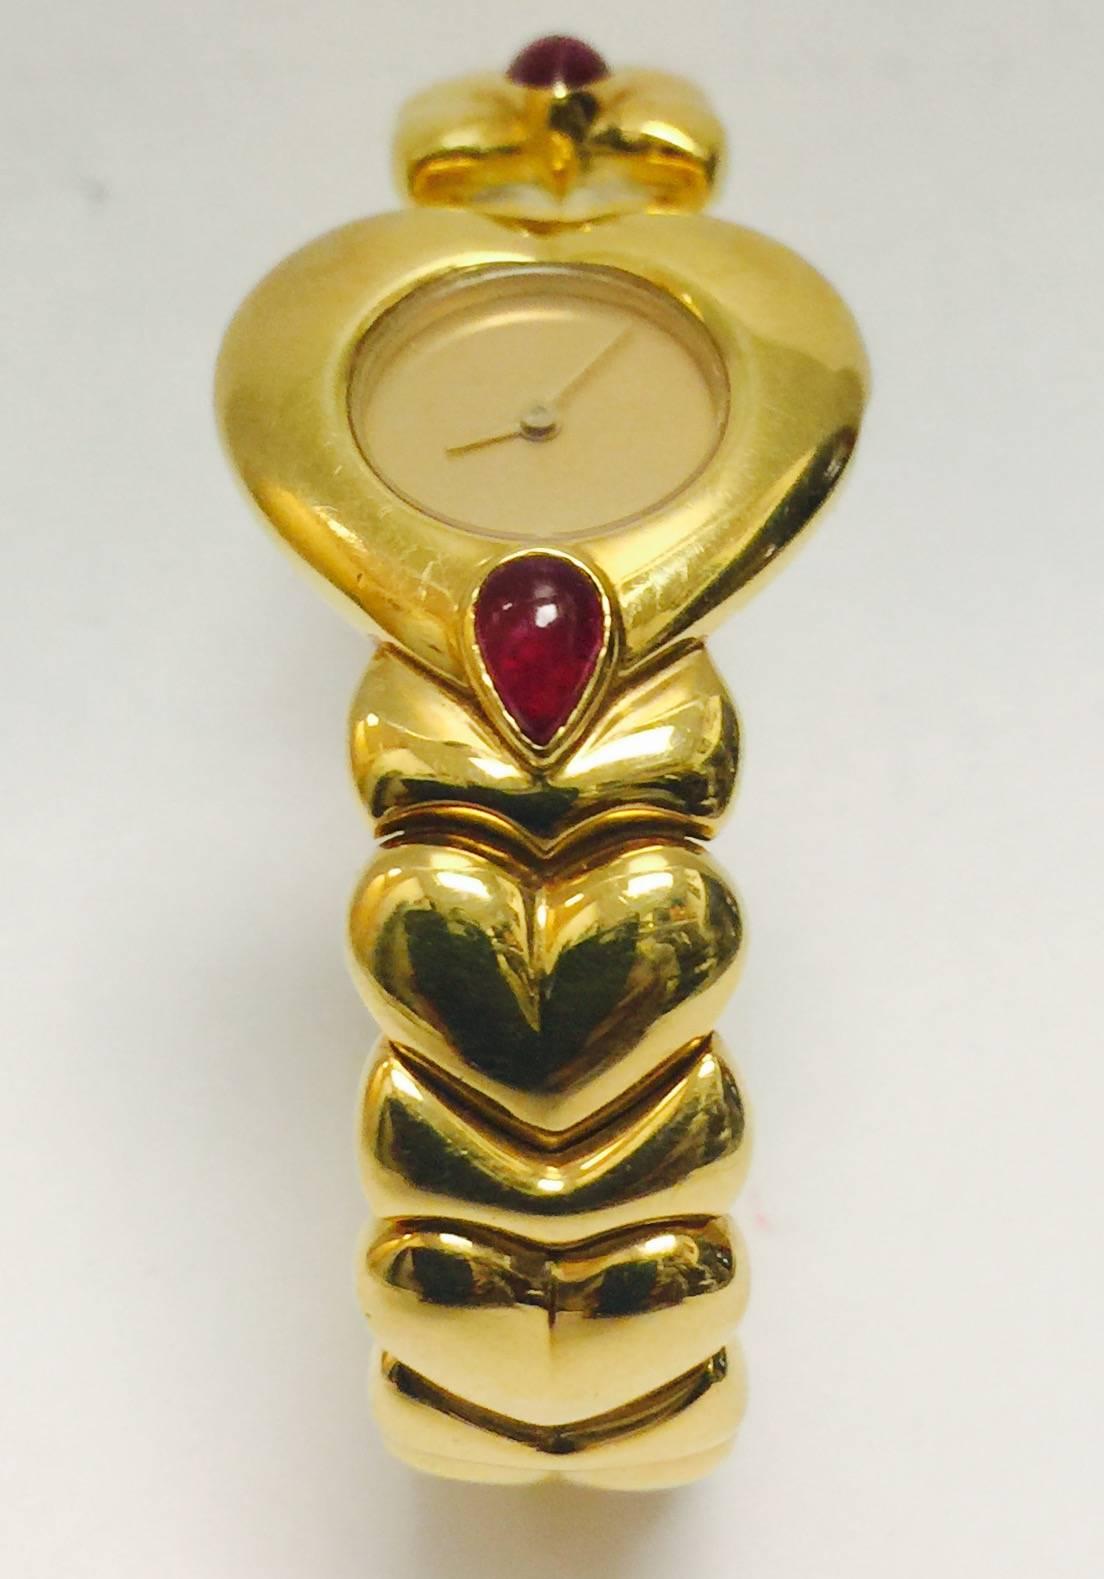 This 18 karat yellow gold watch is a real find!  The heart shape continues all the way around the open ended bracelet. So easy to put on and take off! Two pear shape cabochon rubies add interest and color.  Swiss Quartz movement.  A diamond is